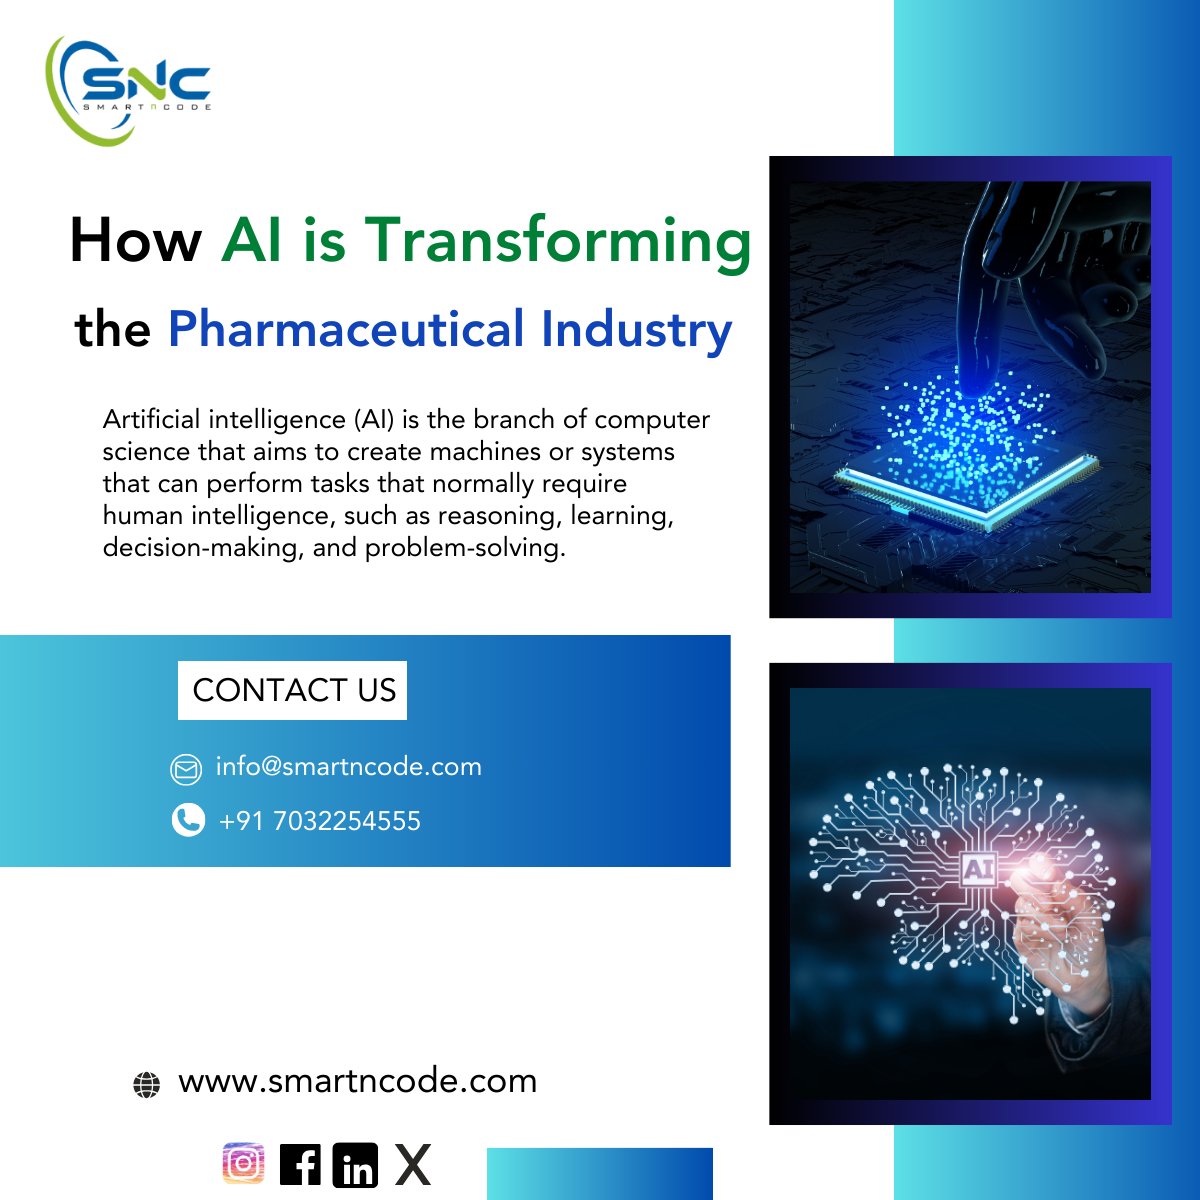 The field of computer science known as artificial intelligence (AI) seeks to build devices or systems that are capable of reasoning, learning, making decisions, and solving problems.
fsmartncode.com/artificial-int…

#artificialintelligence #AI #MI #AIhealthcare #AIpharmaceutical